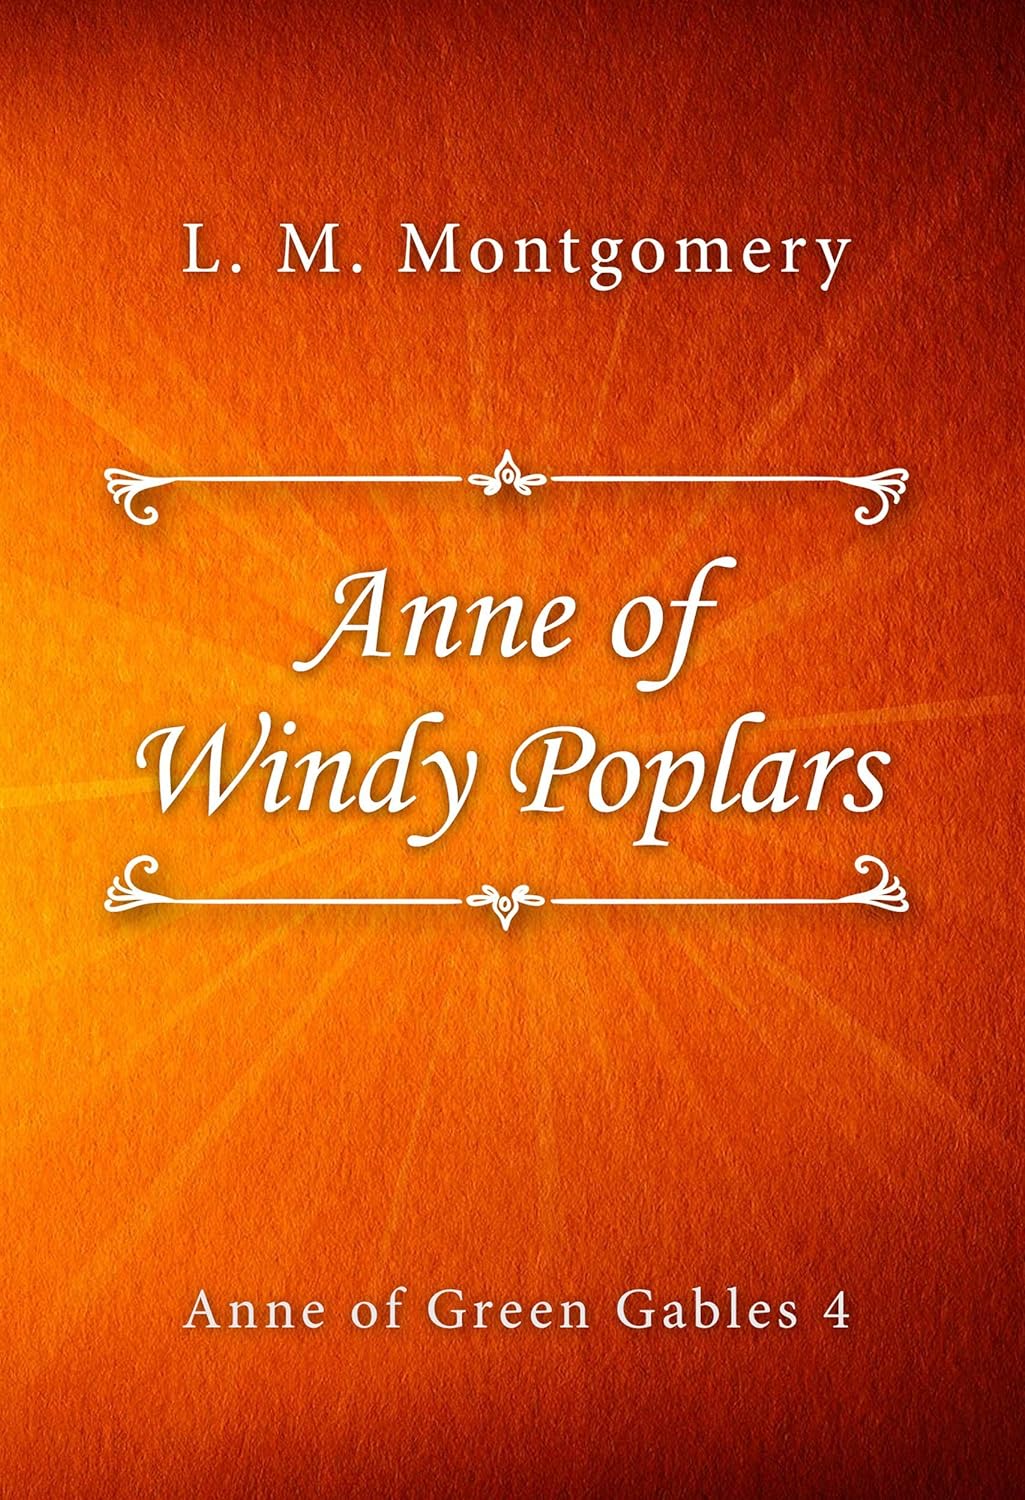 Anne of Windy Poplars (Anne of Green Gables series Book 4)